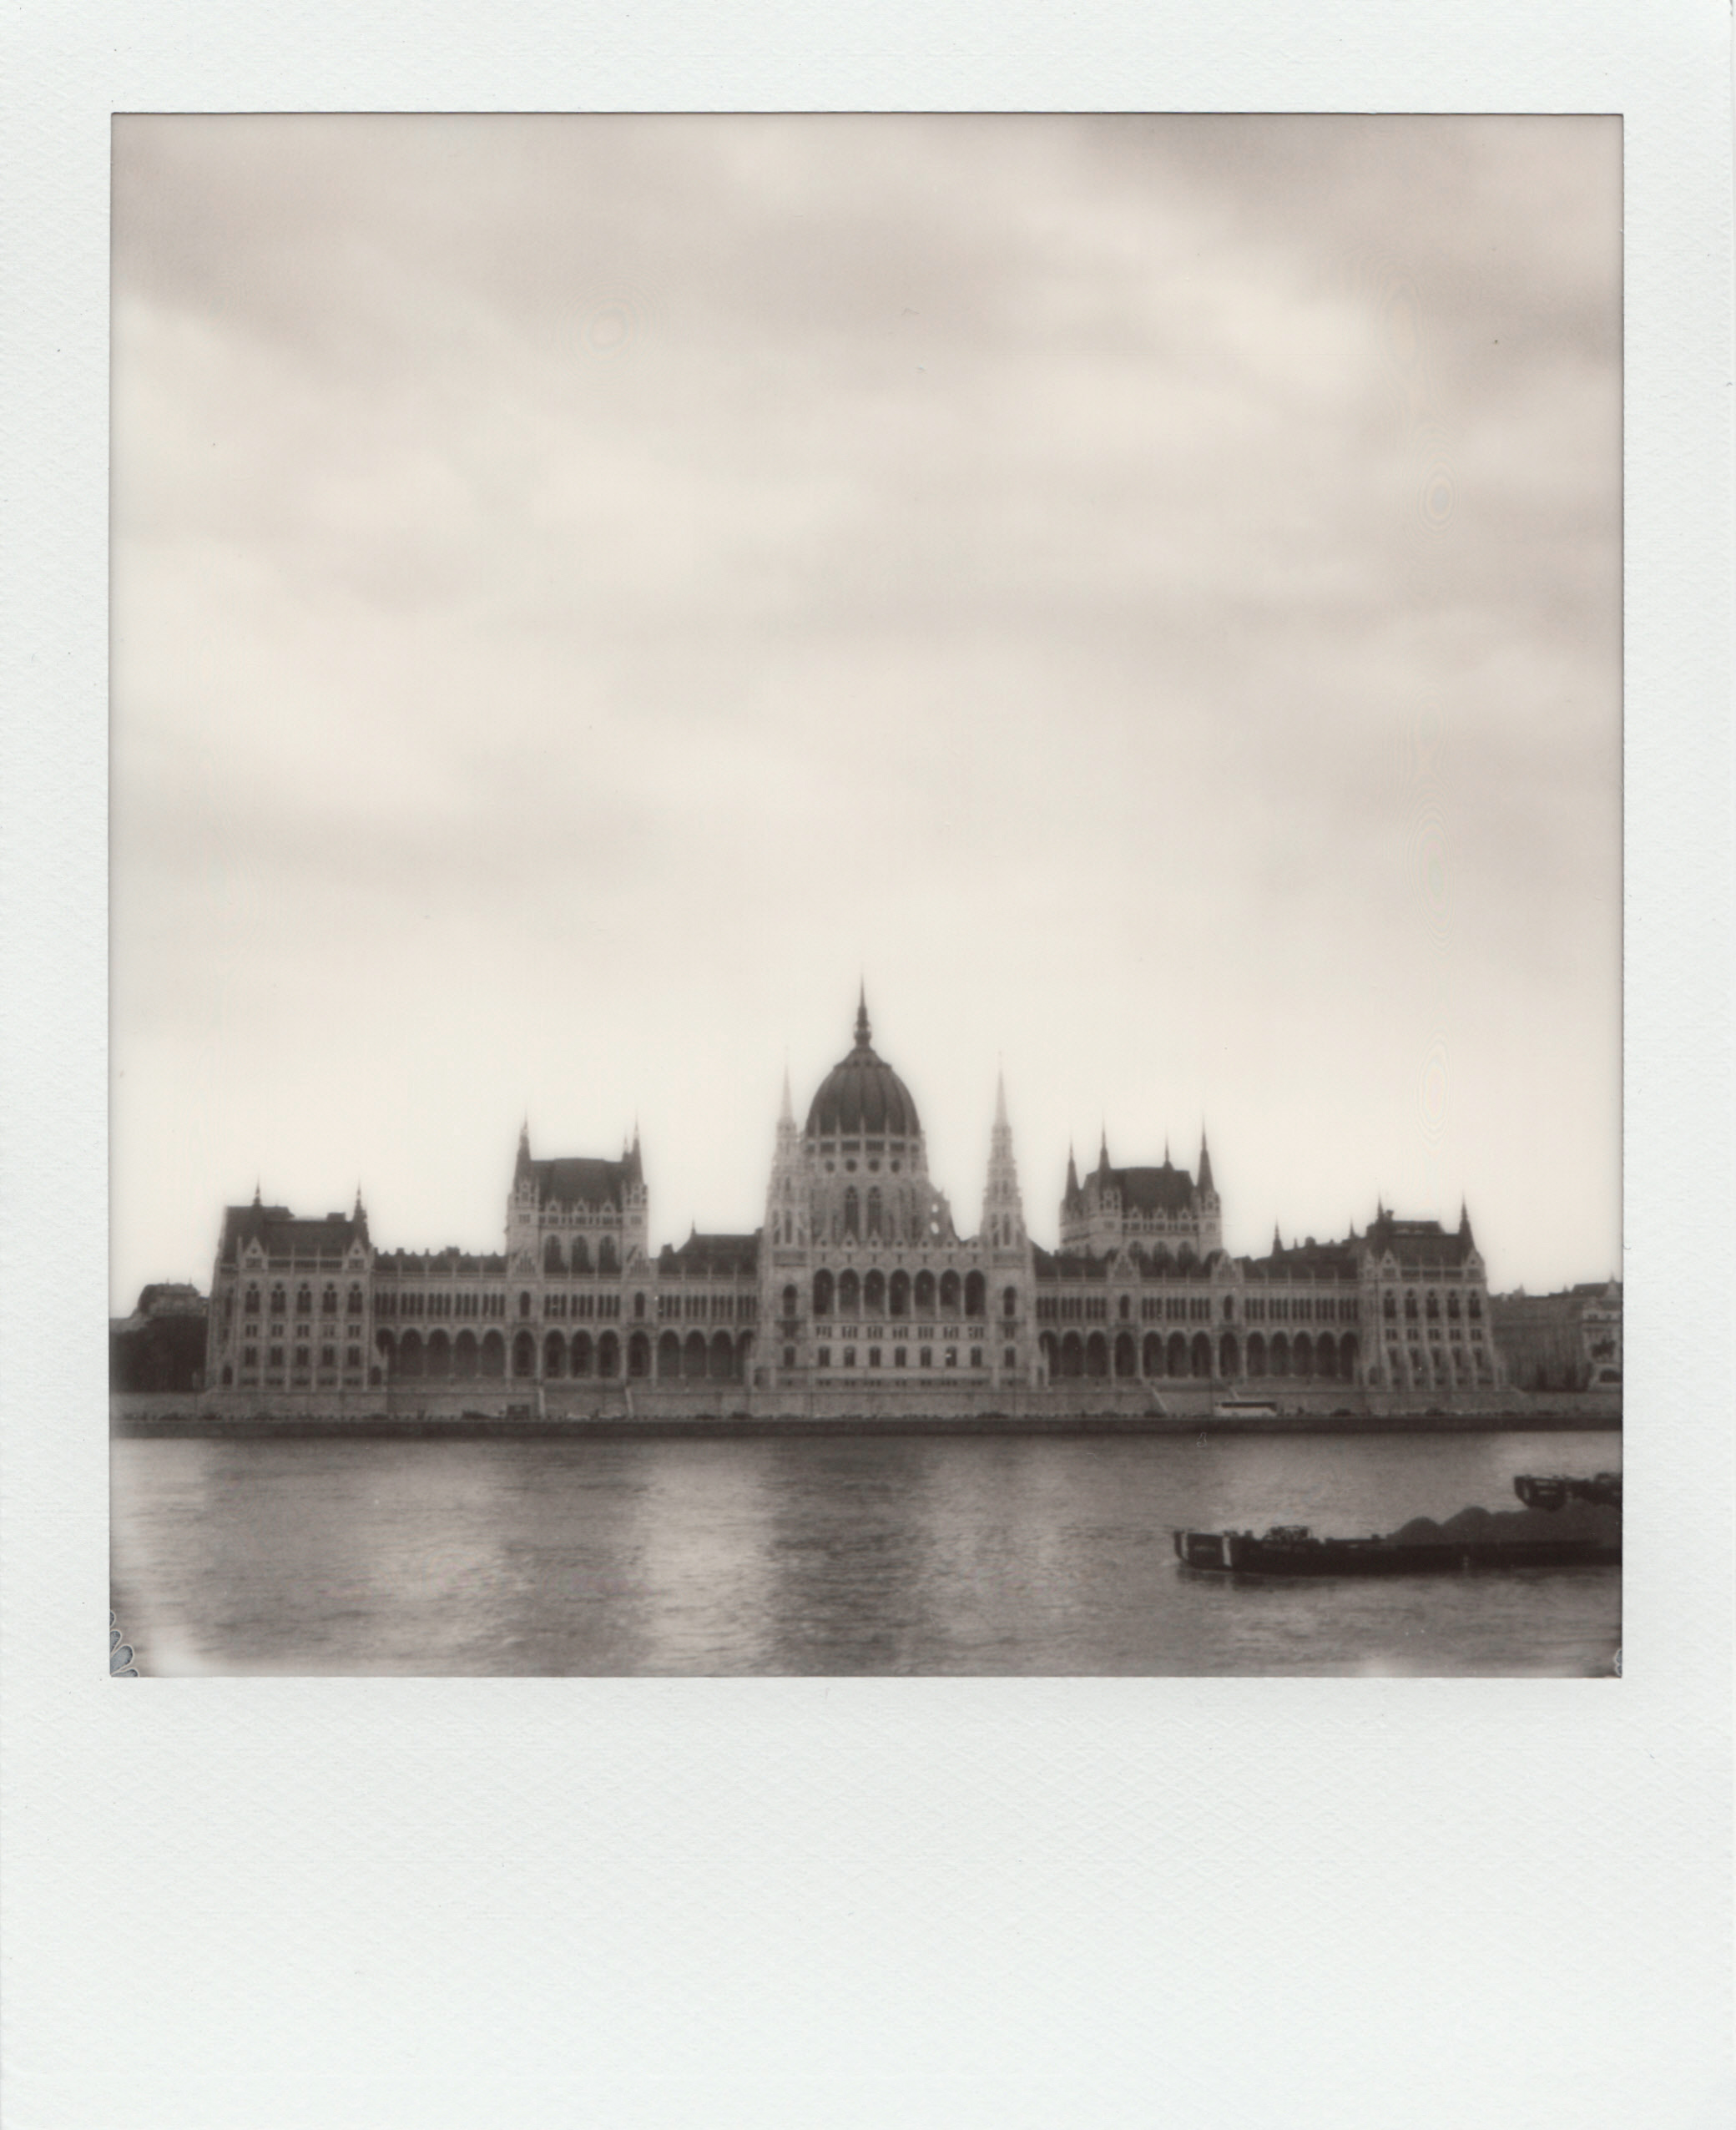 When In Budapest | SX-70 Alpha1 | Impossible Project Black and White SX-70 film | Ioana Taut